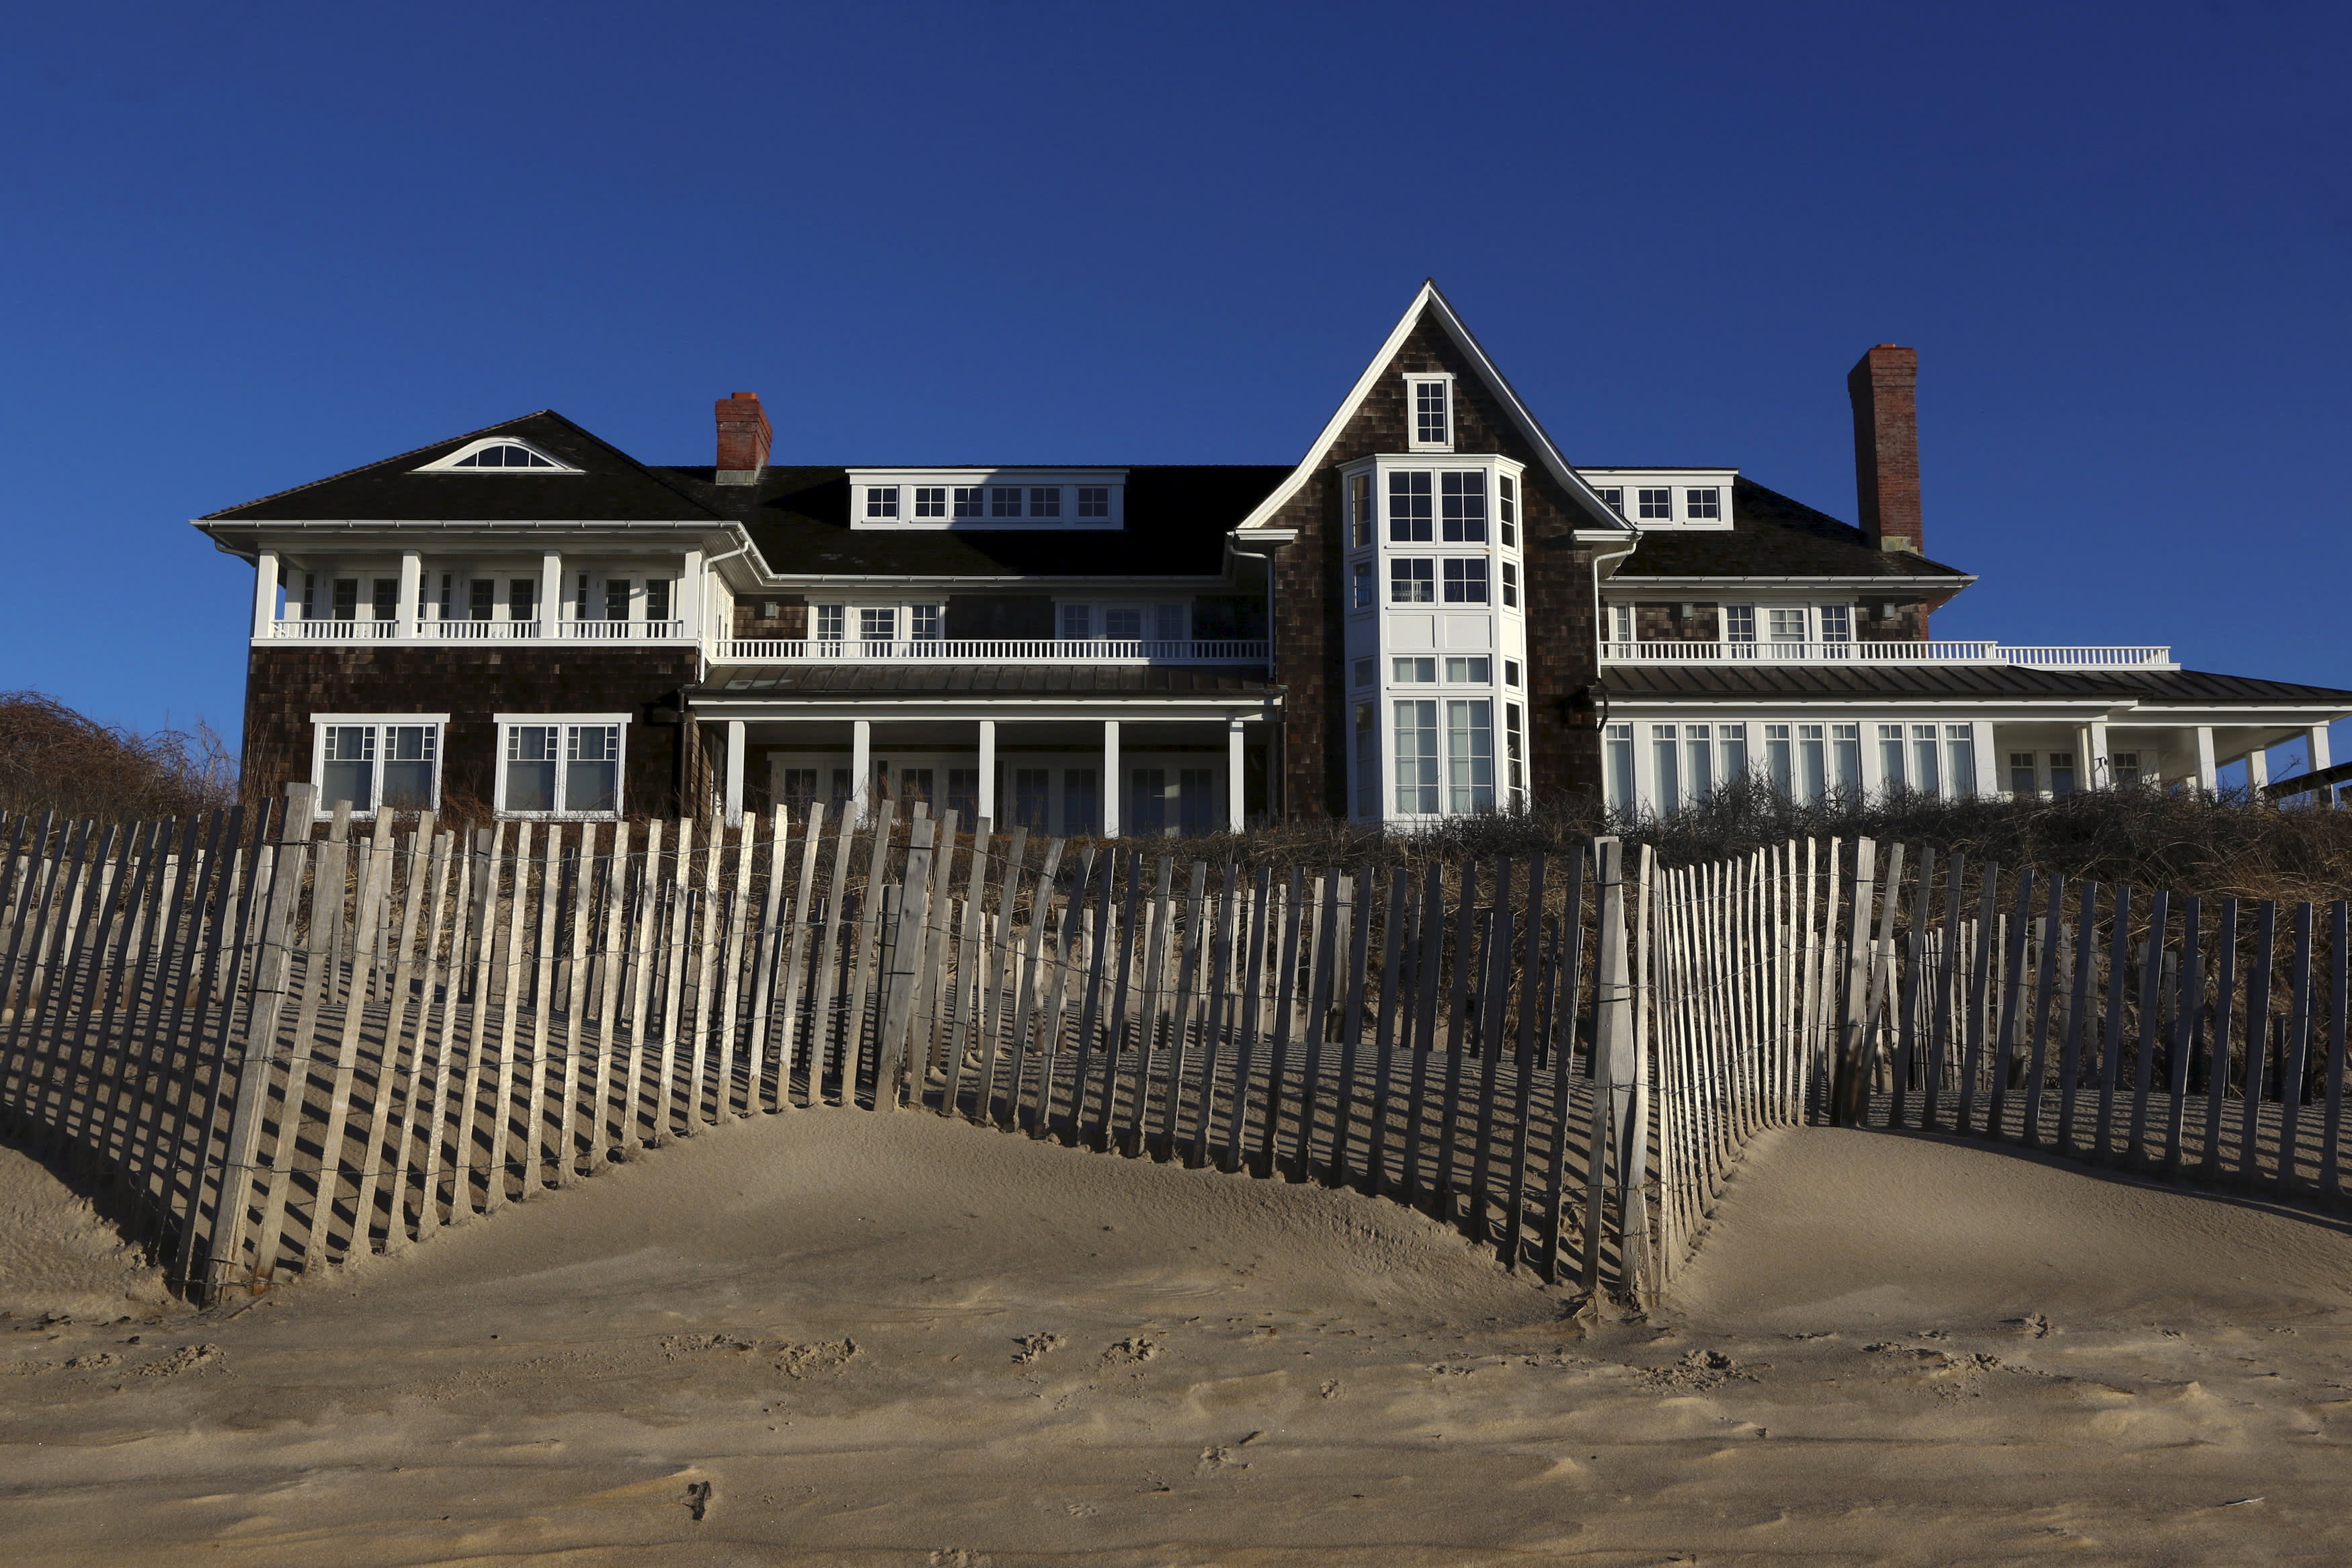 A house just rented in the Hamptons for $ 2 million for the summer